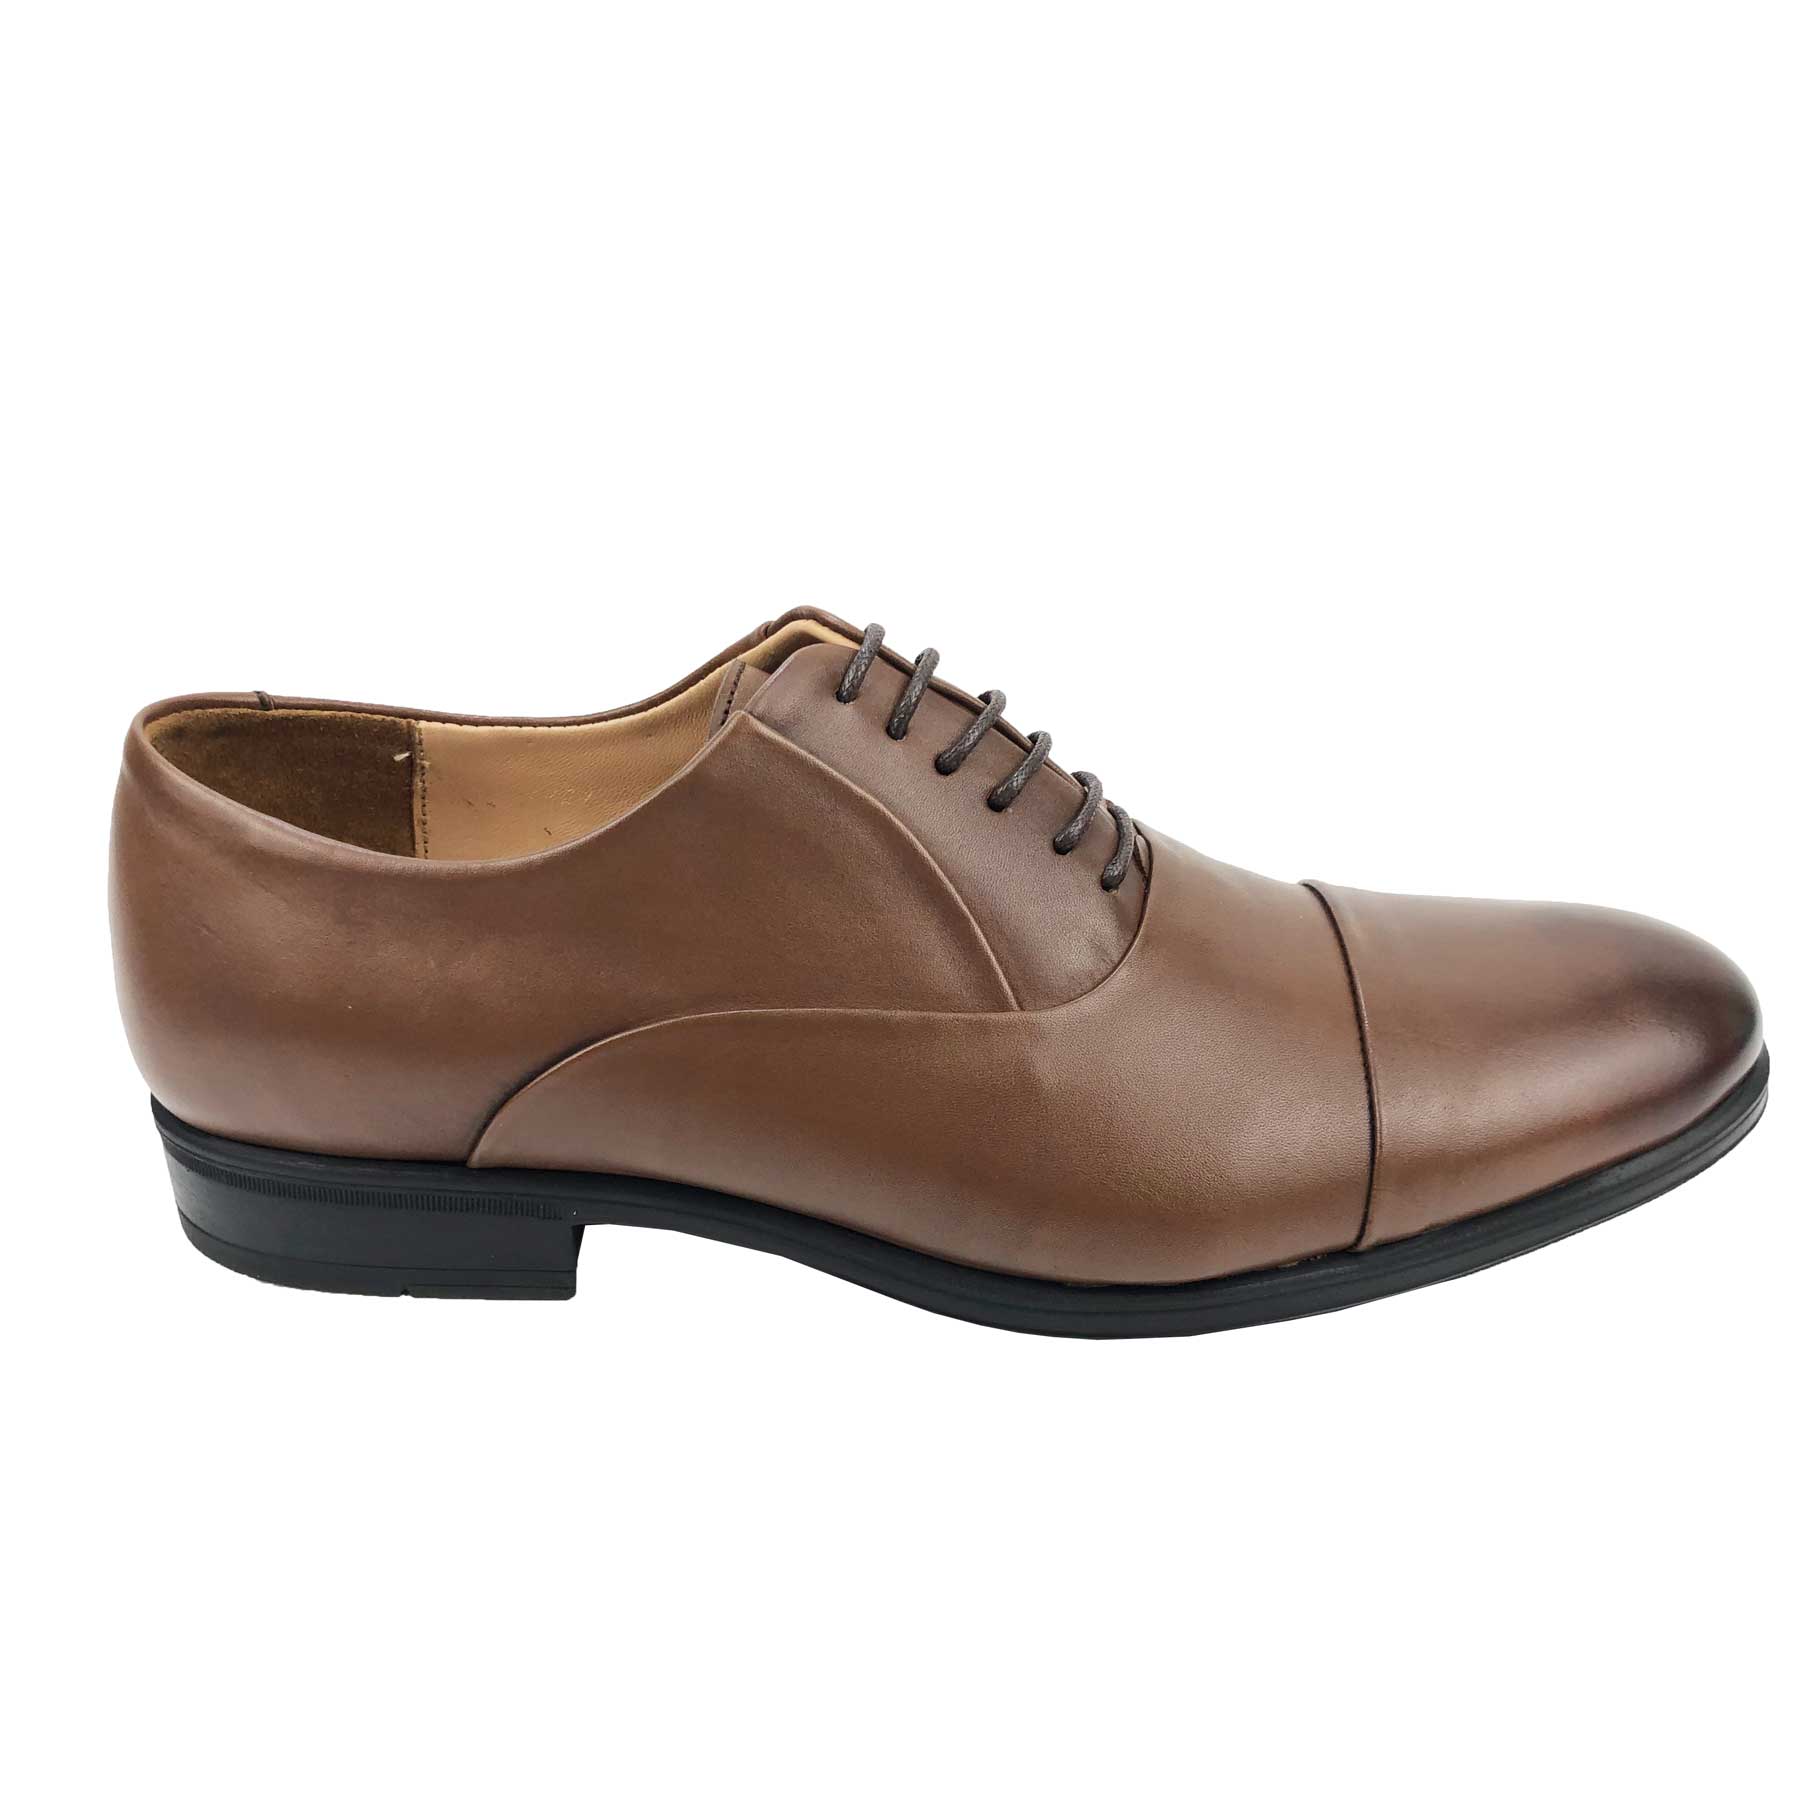 CH1321-015 - Chaussure cuir Taba - deluxe-maroc